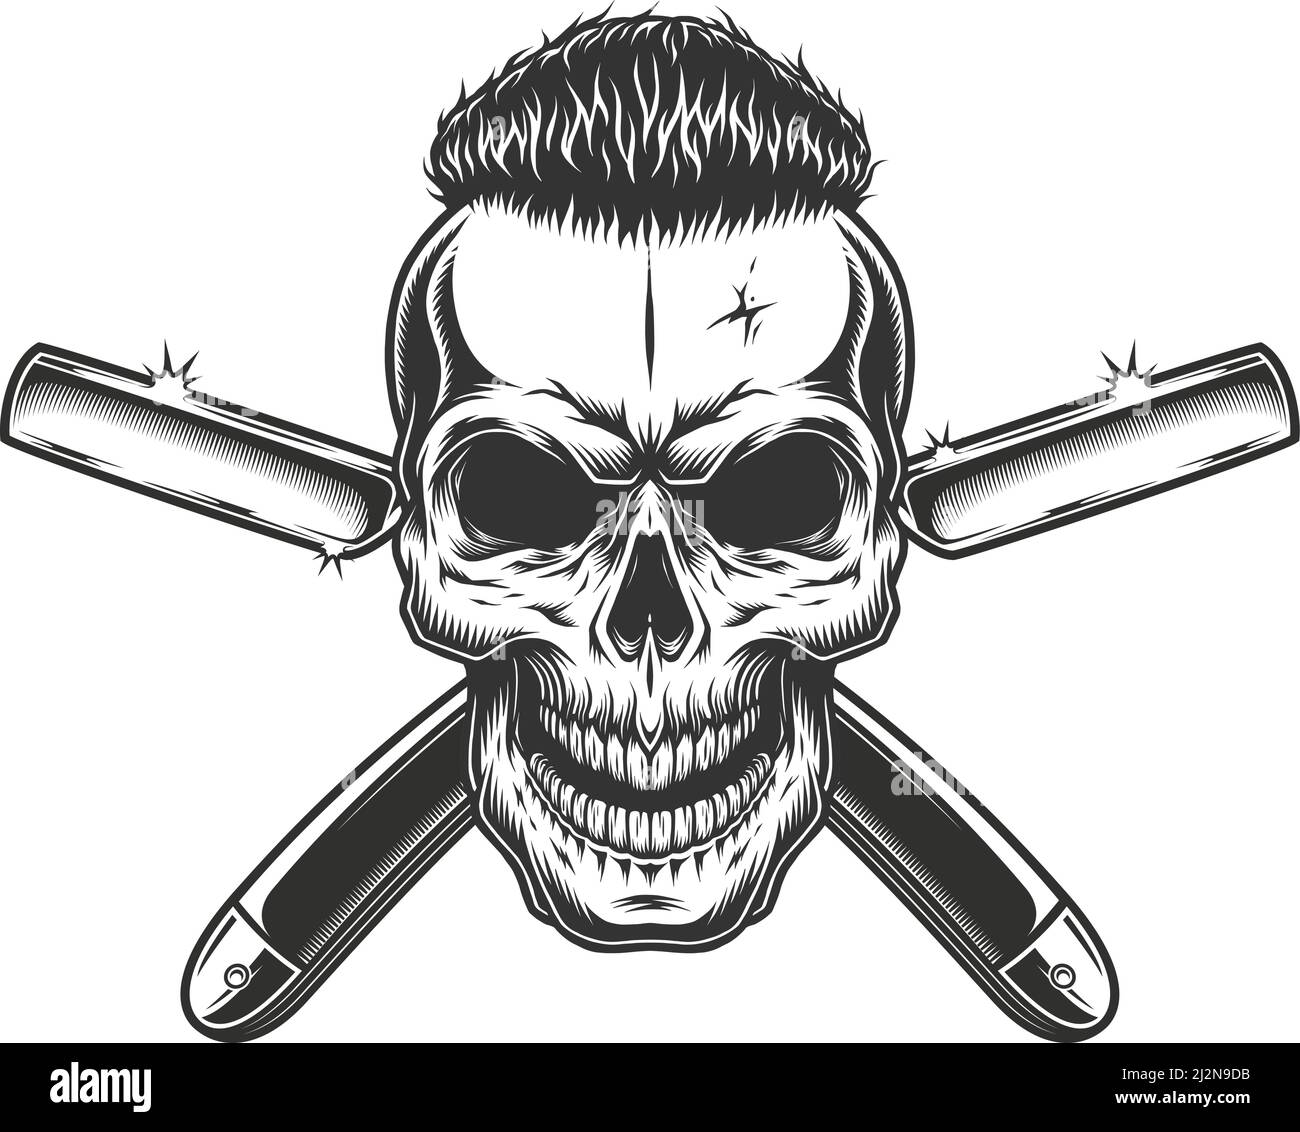 Barber's skull, scissors and razor. Ink black and white drawing Stock Photo  - Alamy